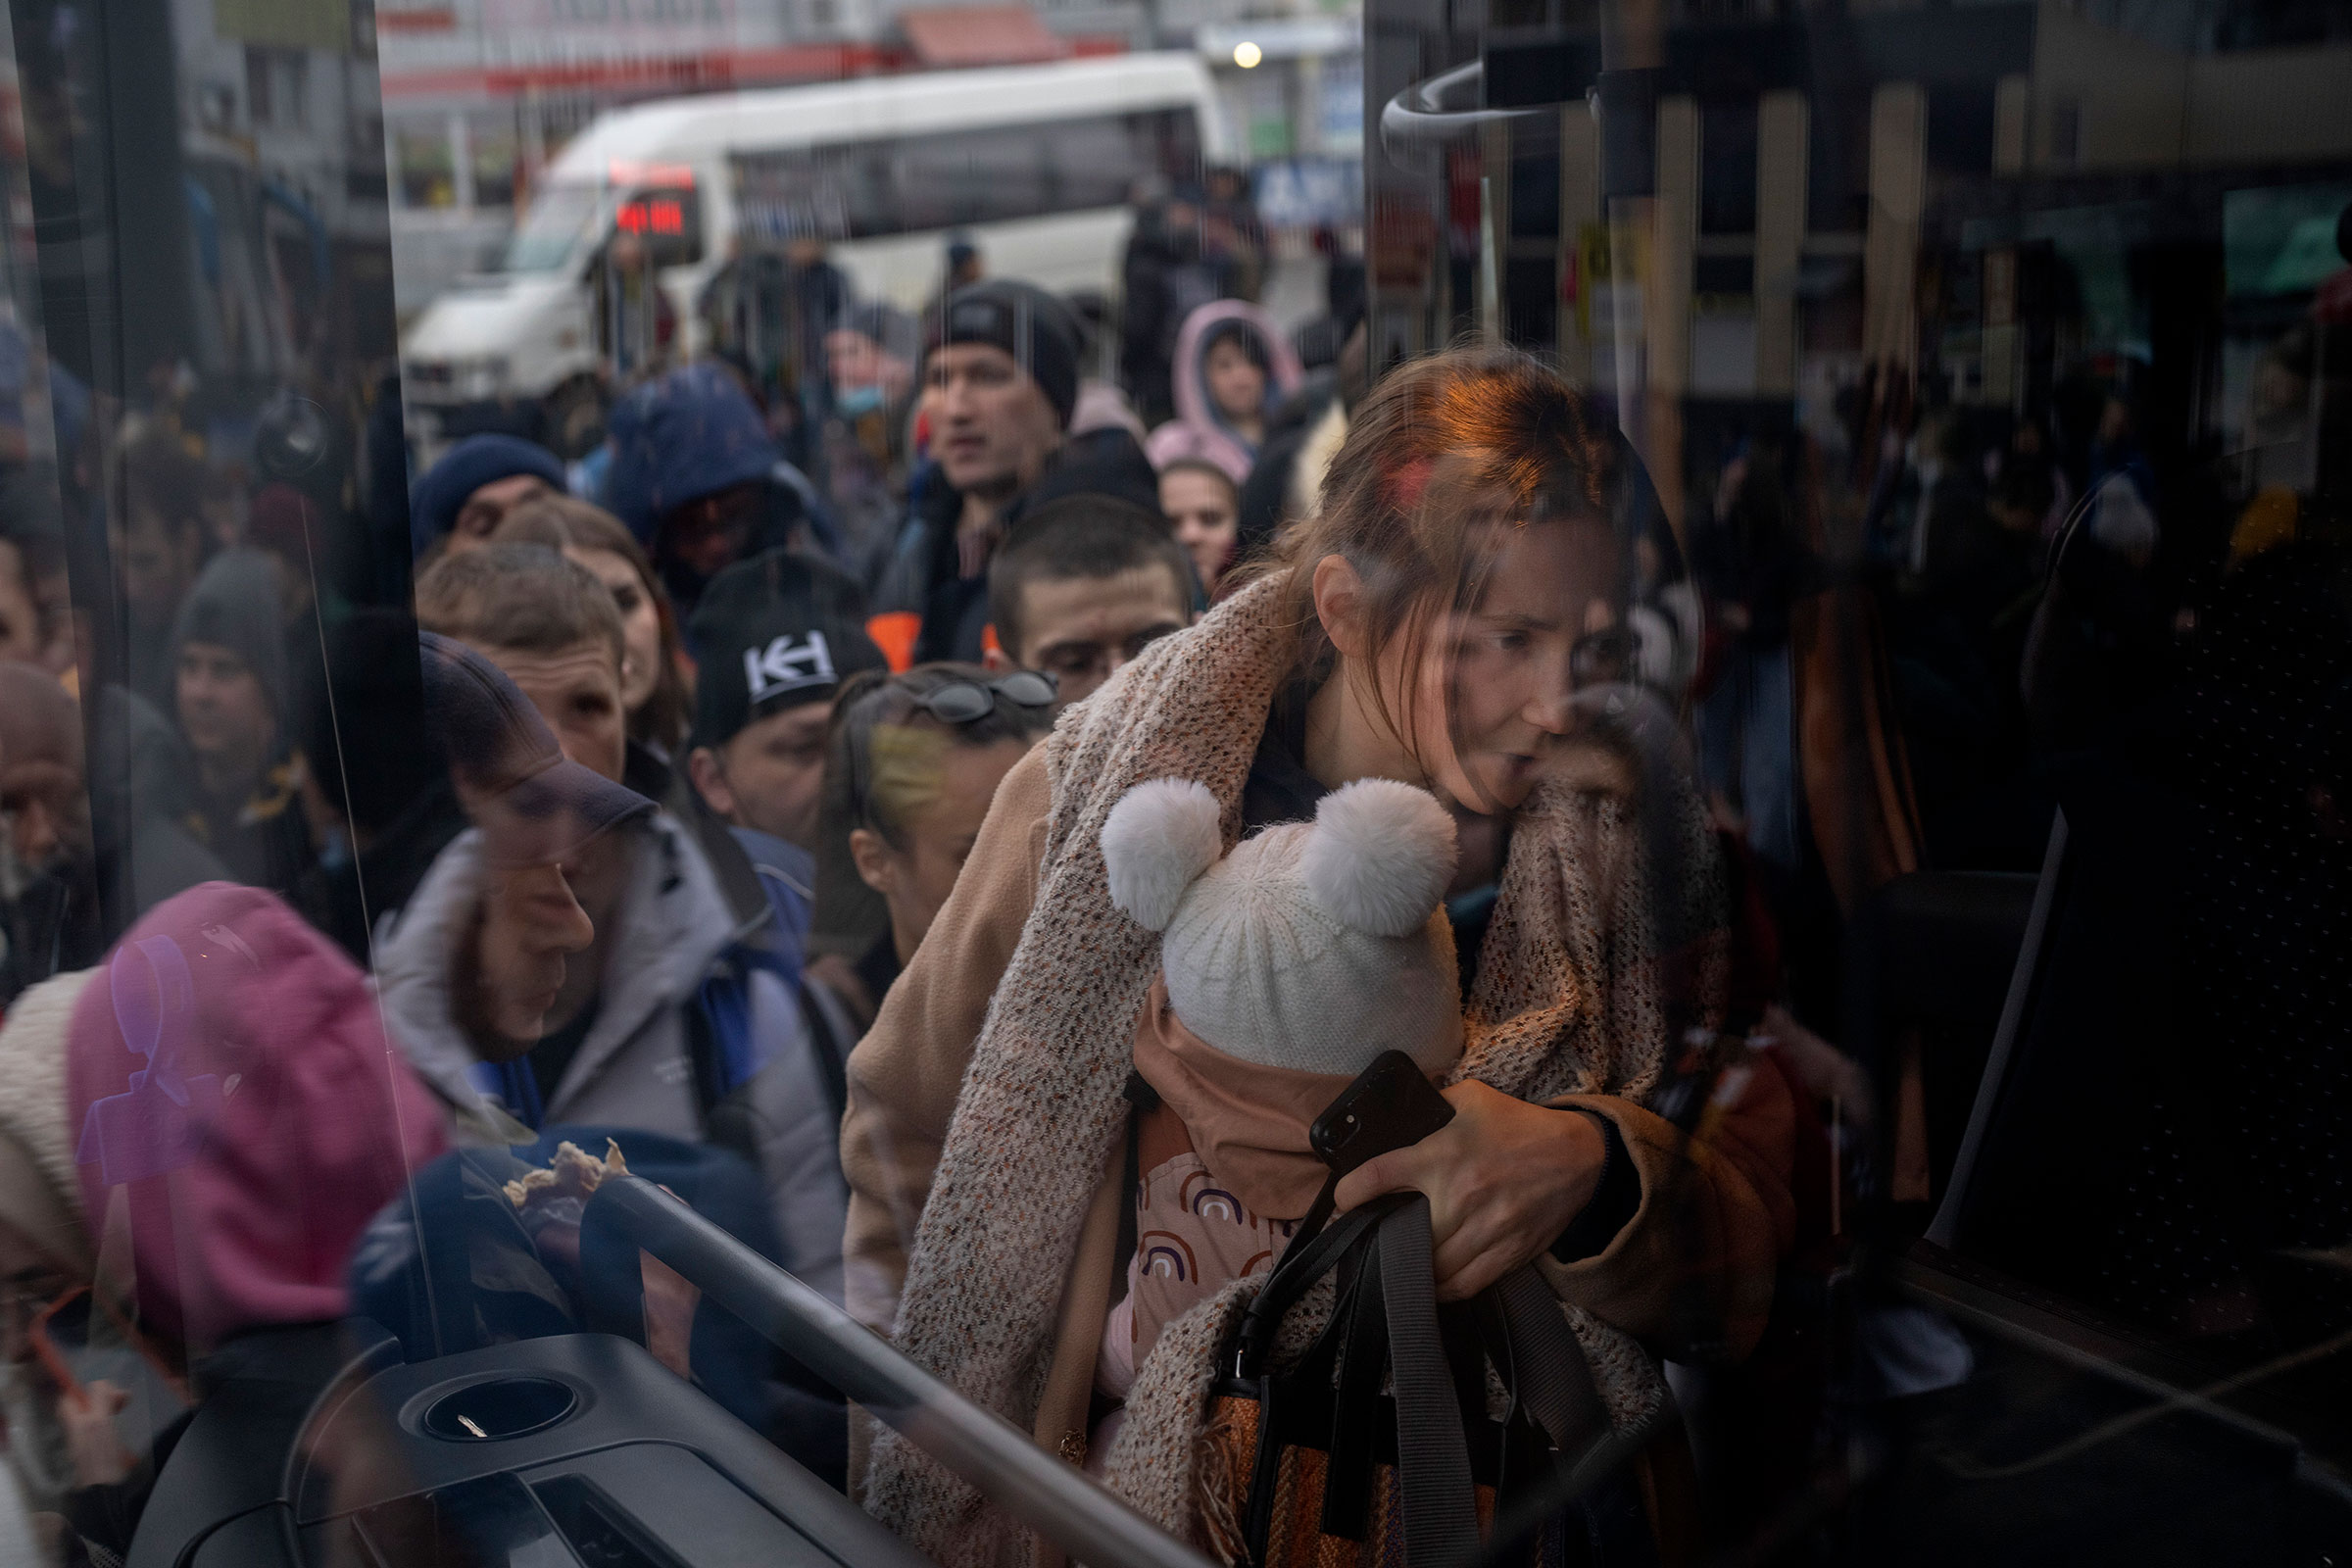 A woman holds her baby as she gets on a bus leaving Kyiv on Feb. 24. (Emilio Morenatti—AP)